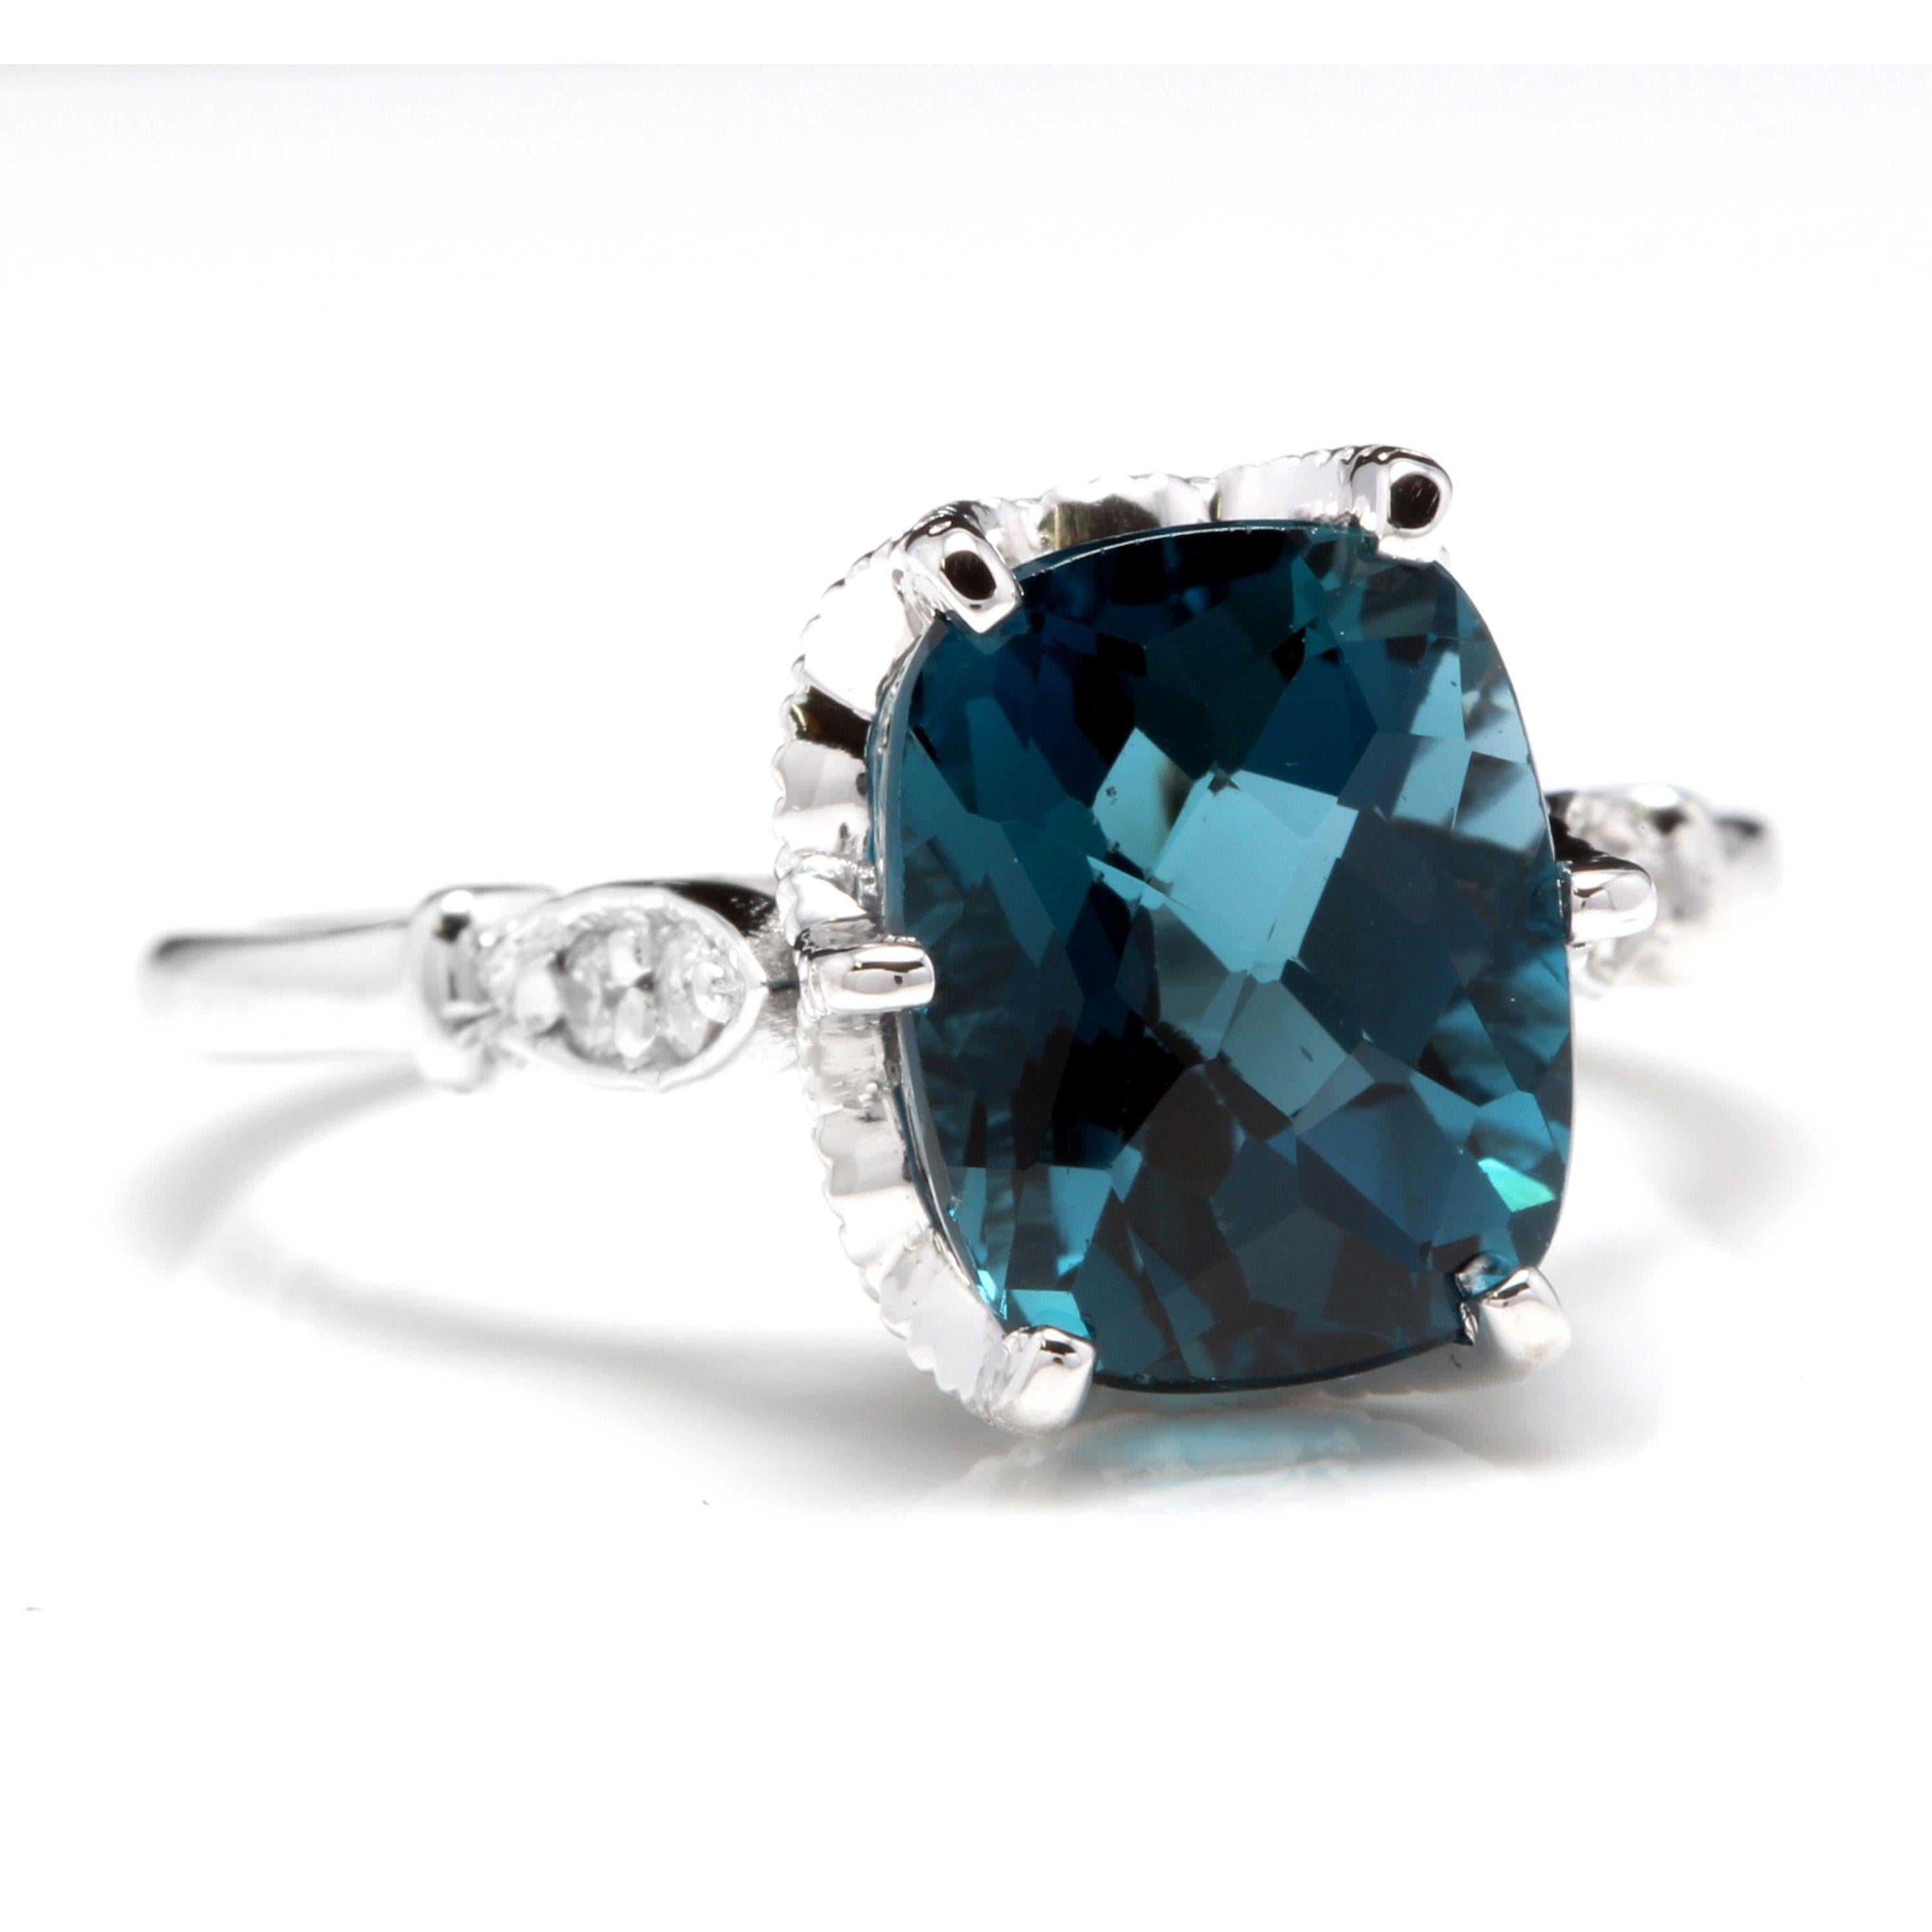 4.08 Carats Natural Impressive London Blue Topaz and Diamond 14K White Gold Ring

Total Natural London Blue Topaz Weight is: Approx. 4.00 Carats

London Blue Topaz Measures: Approx. 10.00mm x 8.00mm

Natural Round Diamonds Weight: Approx. 0.08